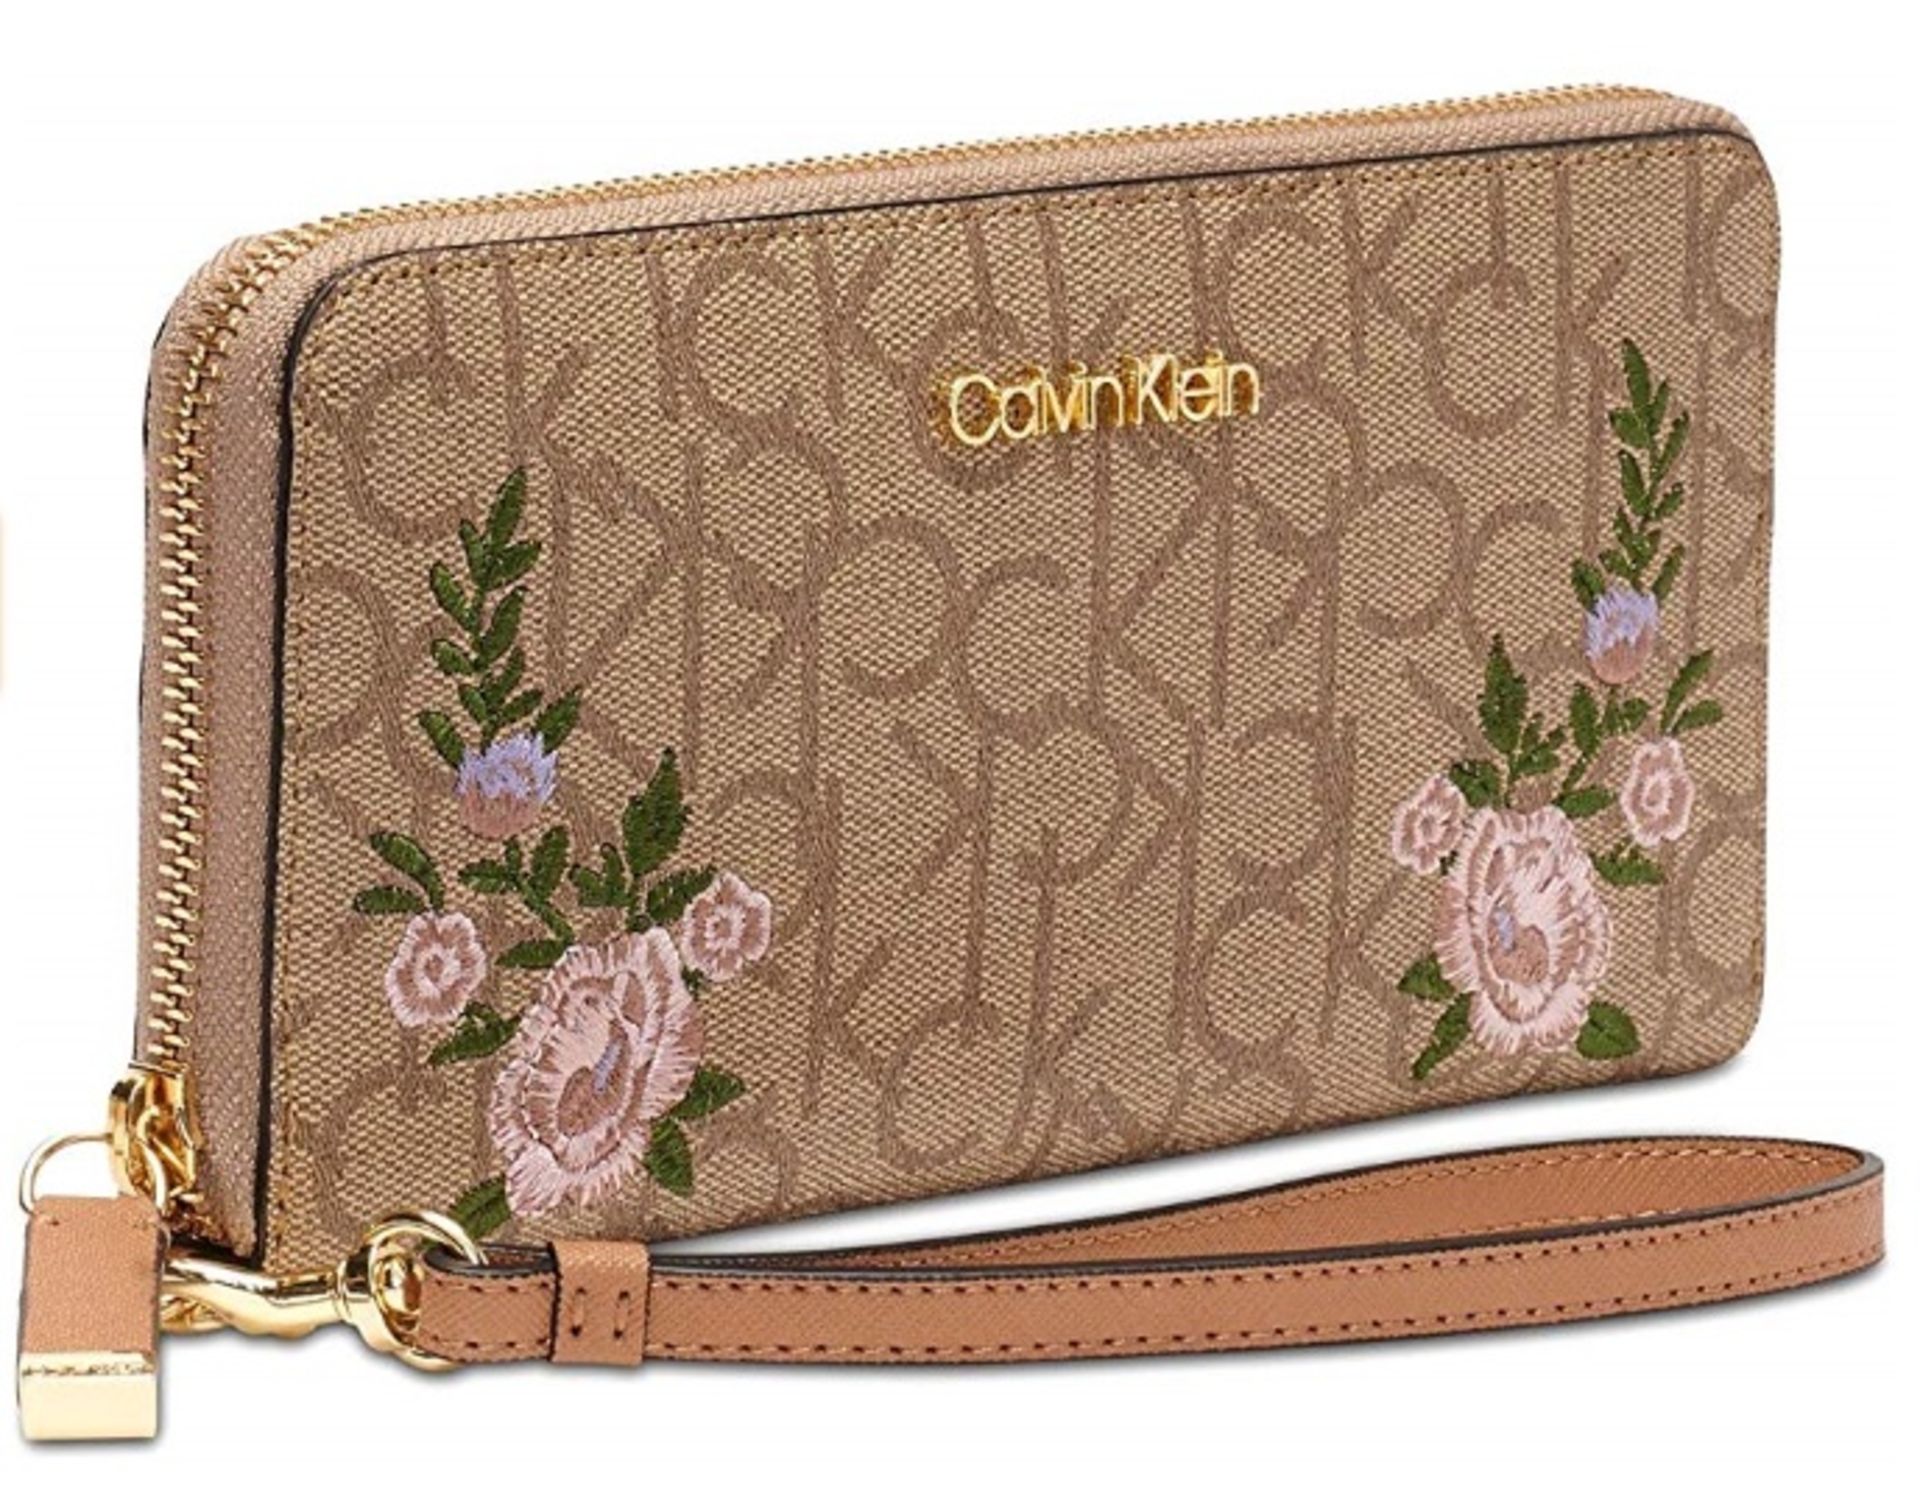 Calvin Klein Pink Floral Embroidered Saffiano Leather Wallet Wristlet RRP £114 - Image 2 of 4